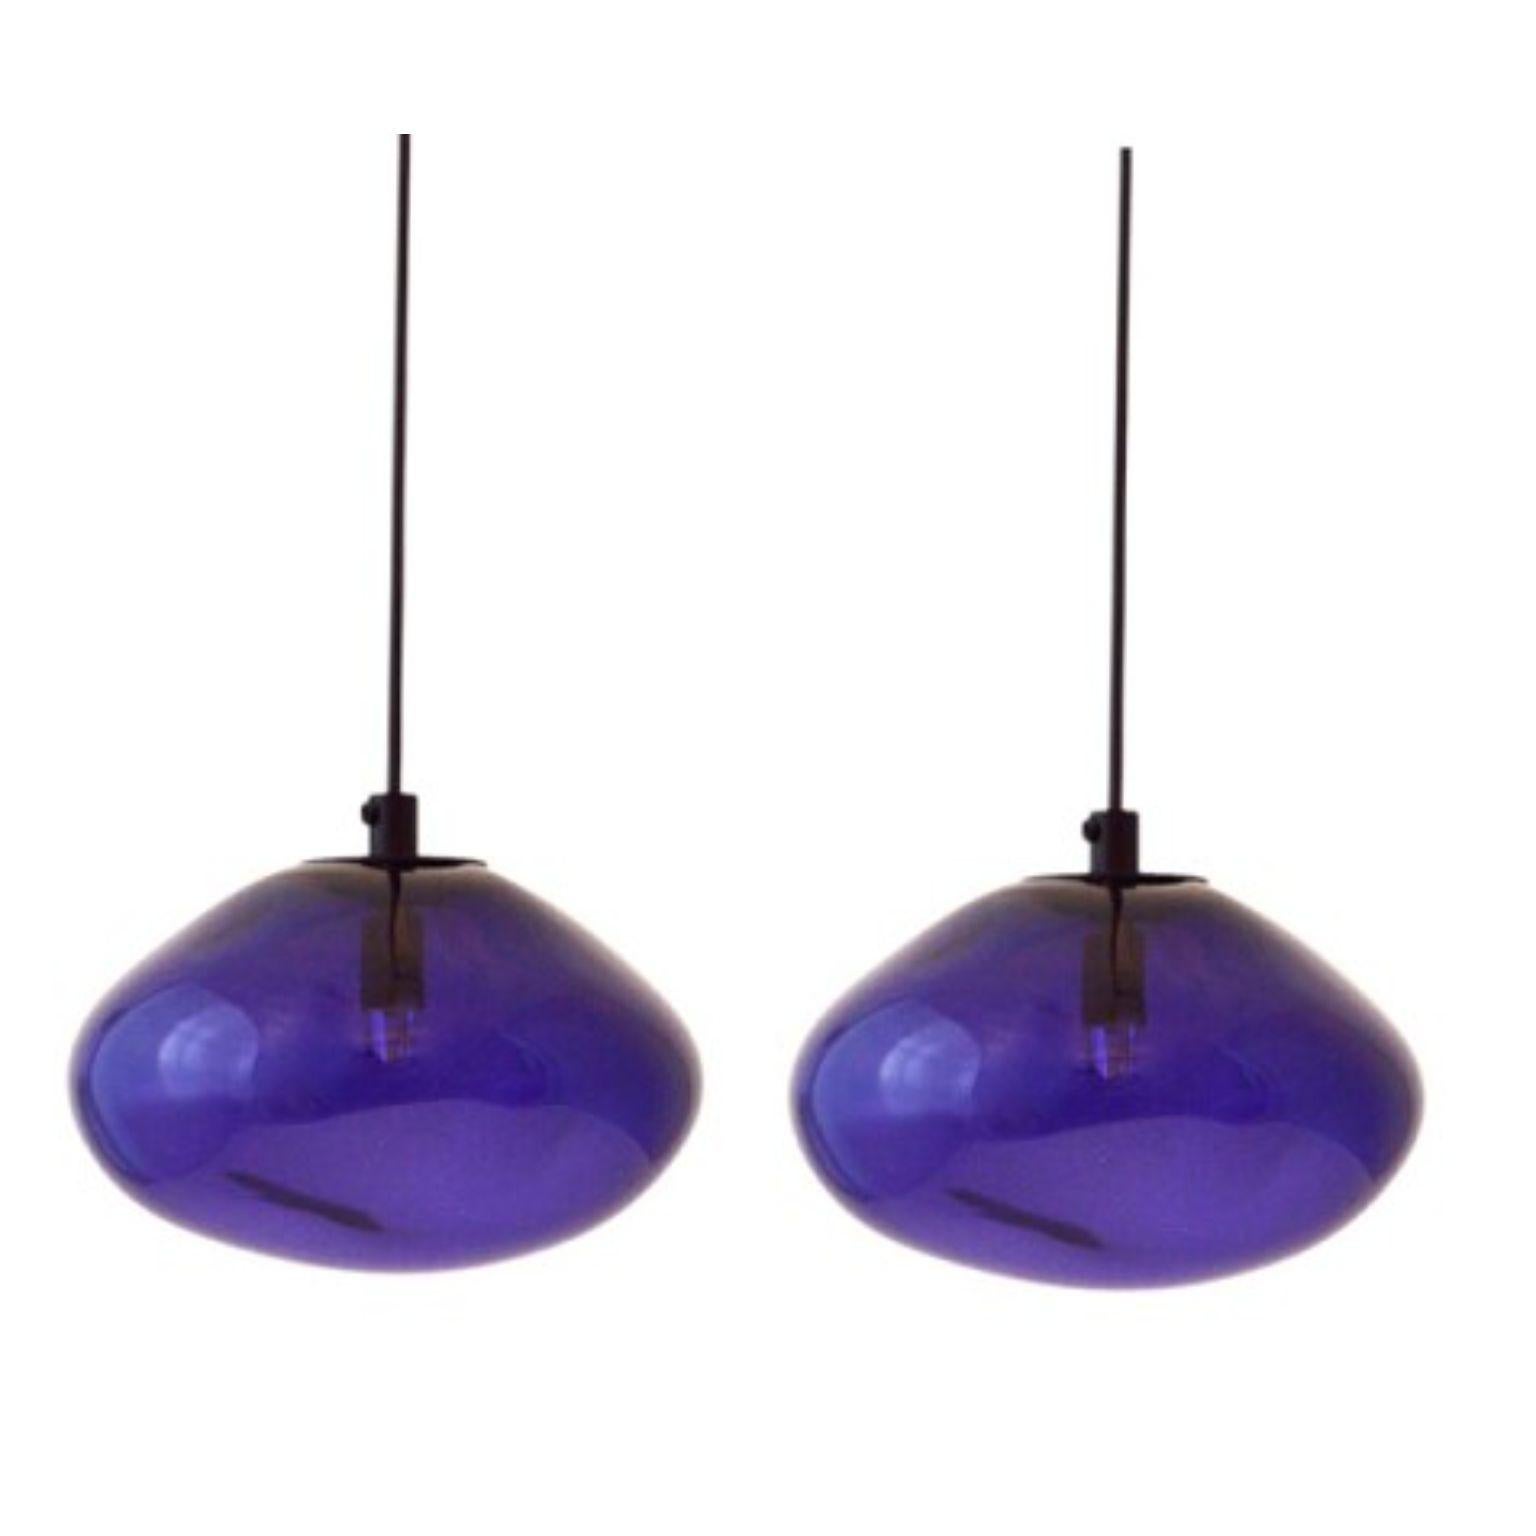 Set of 2 Starglow Violet Pendants by Eloa
Material: glass, steel, silver
Dimensions: D 15 x W 13 x H 100 cm
Also available in different colours and dimensions.

All our lamps can be wired according to each country. If sold to the USA it will be